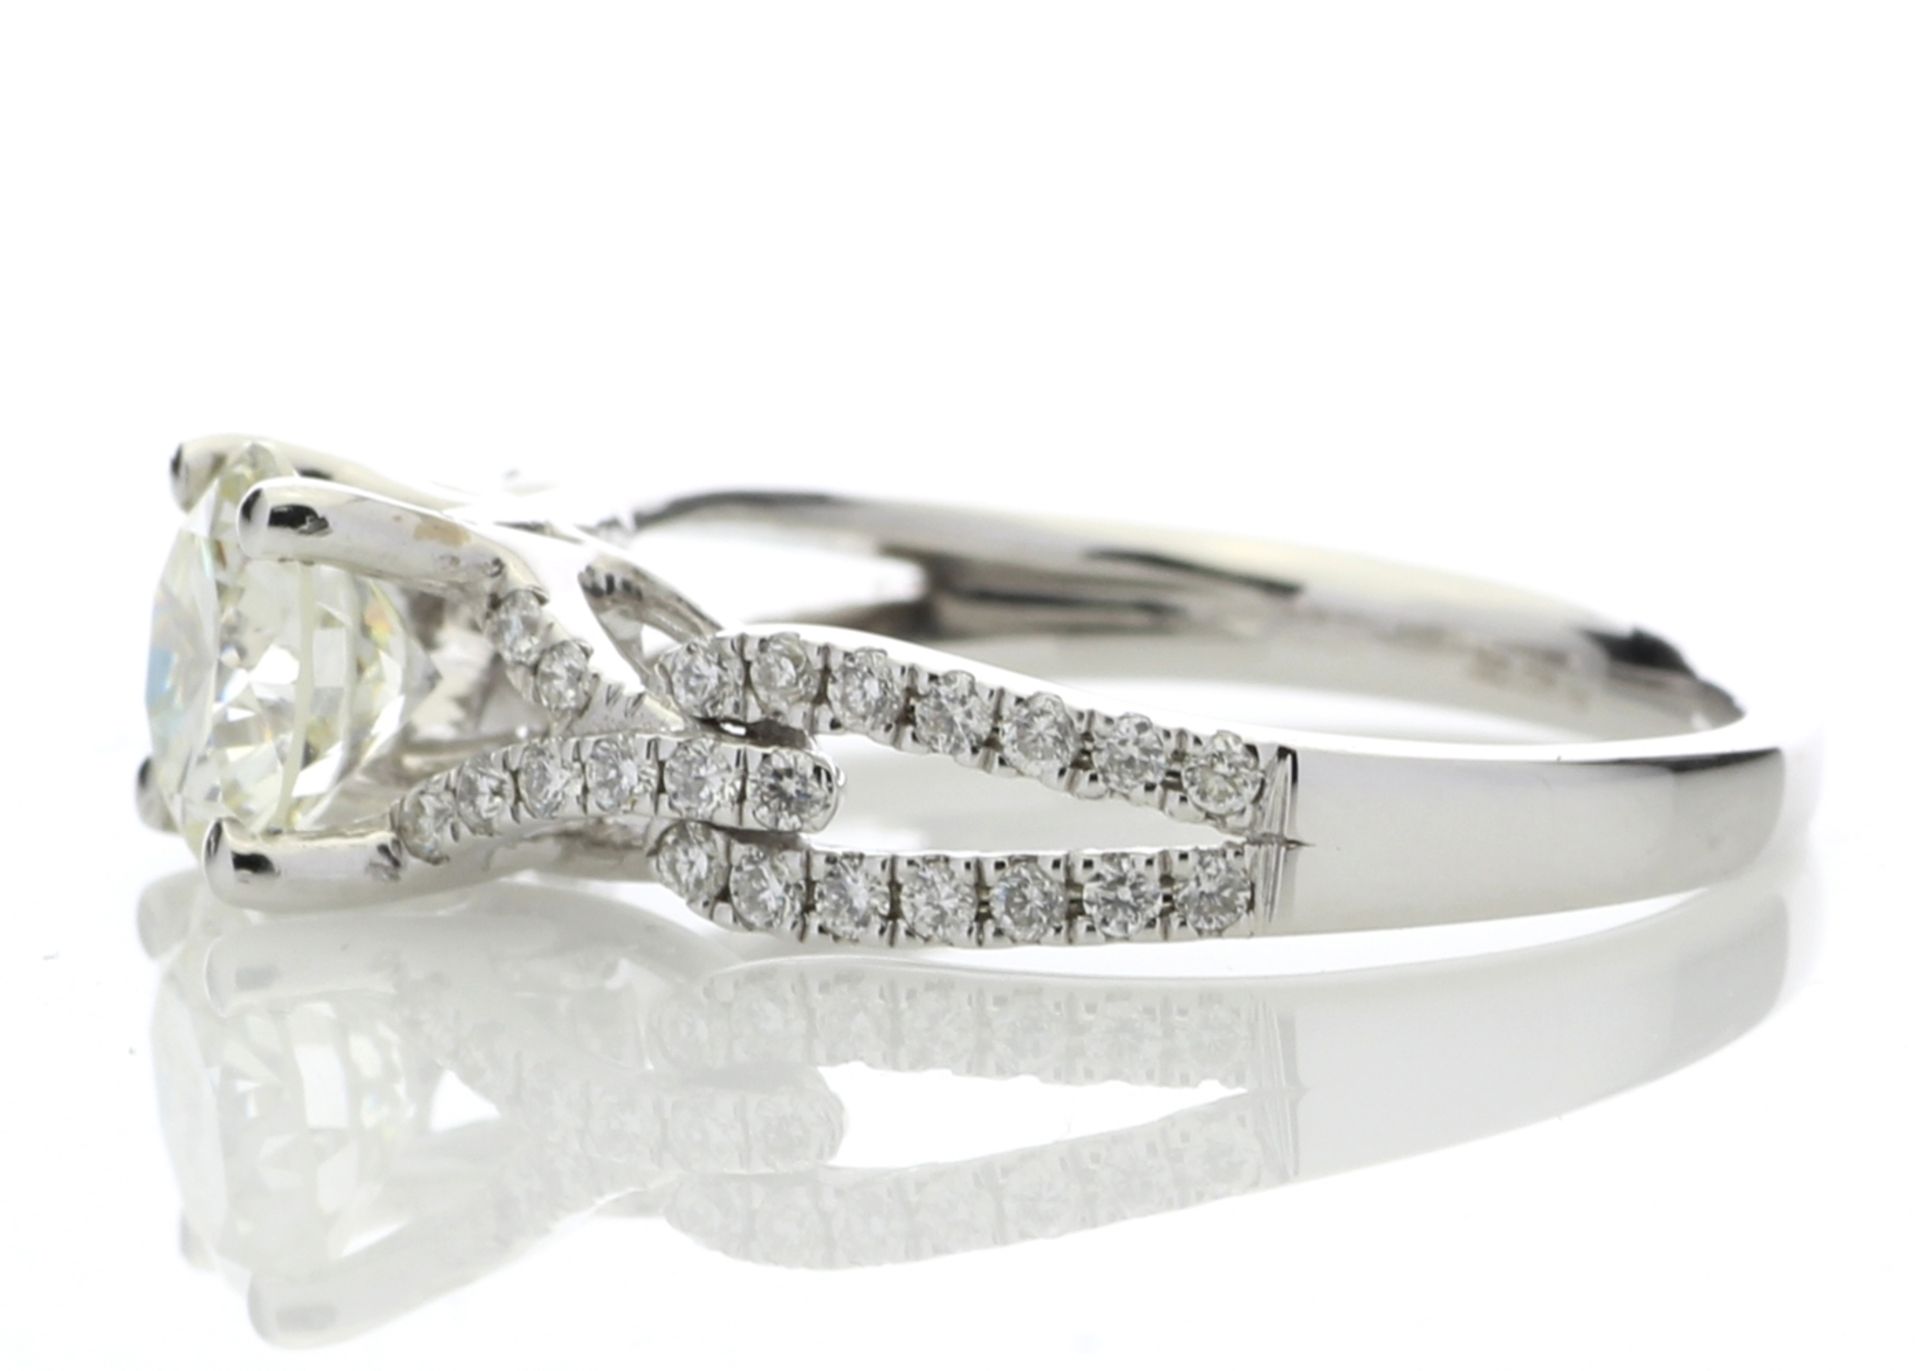 18ct White Gold Single Stone Claw Set With Stone Set Shoulders Diamond Ring (1.03) 1.32 Carats - - Image 3 of 5